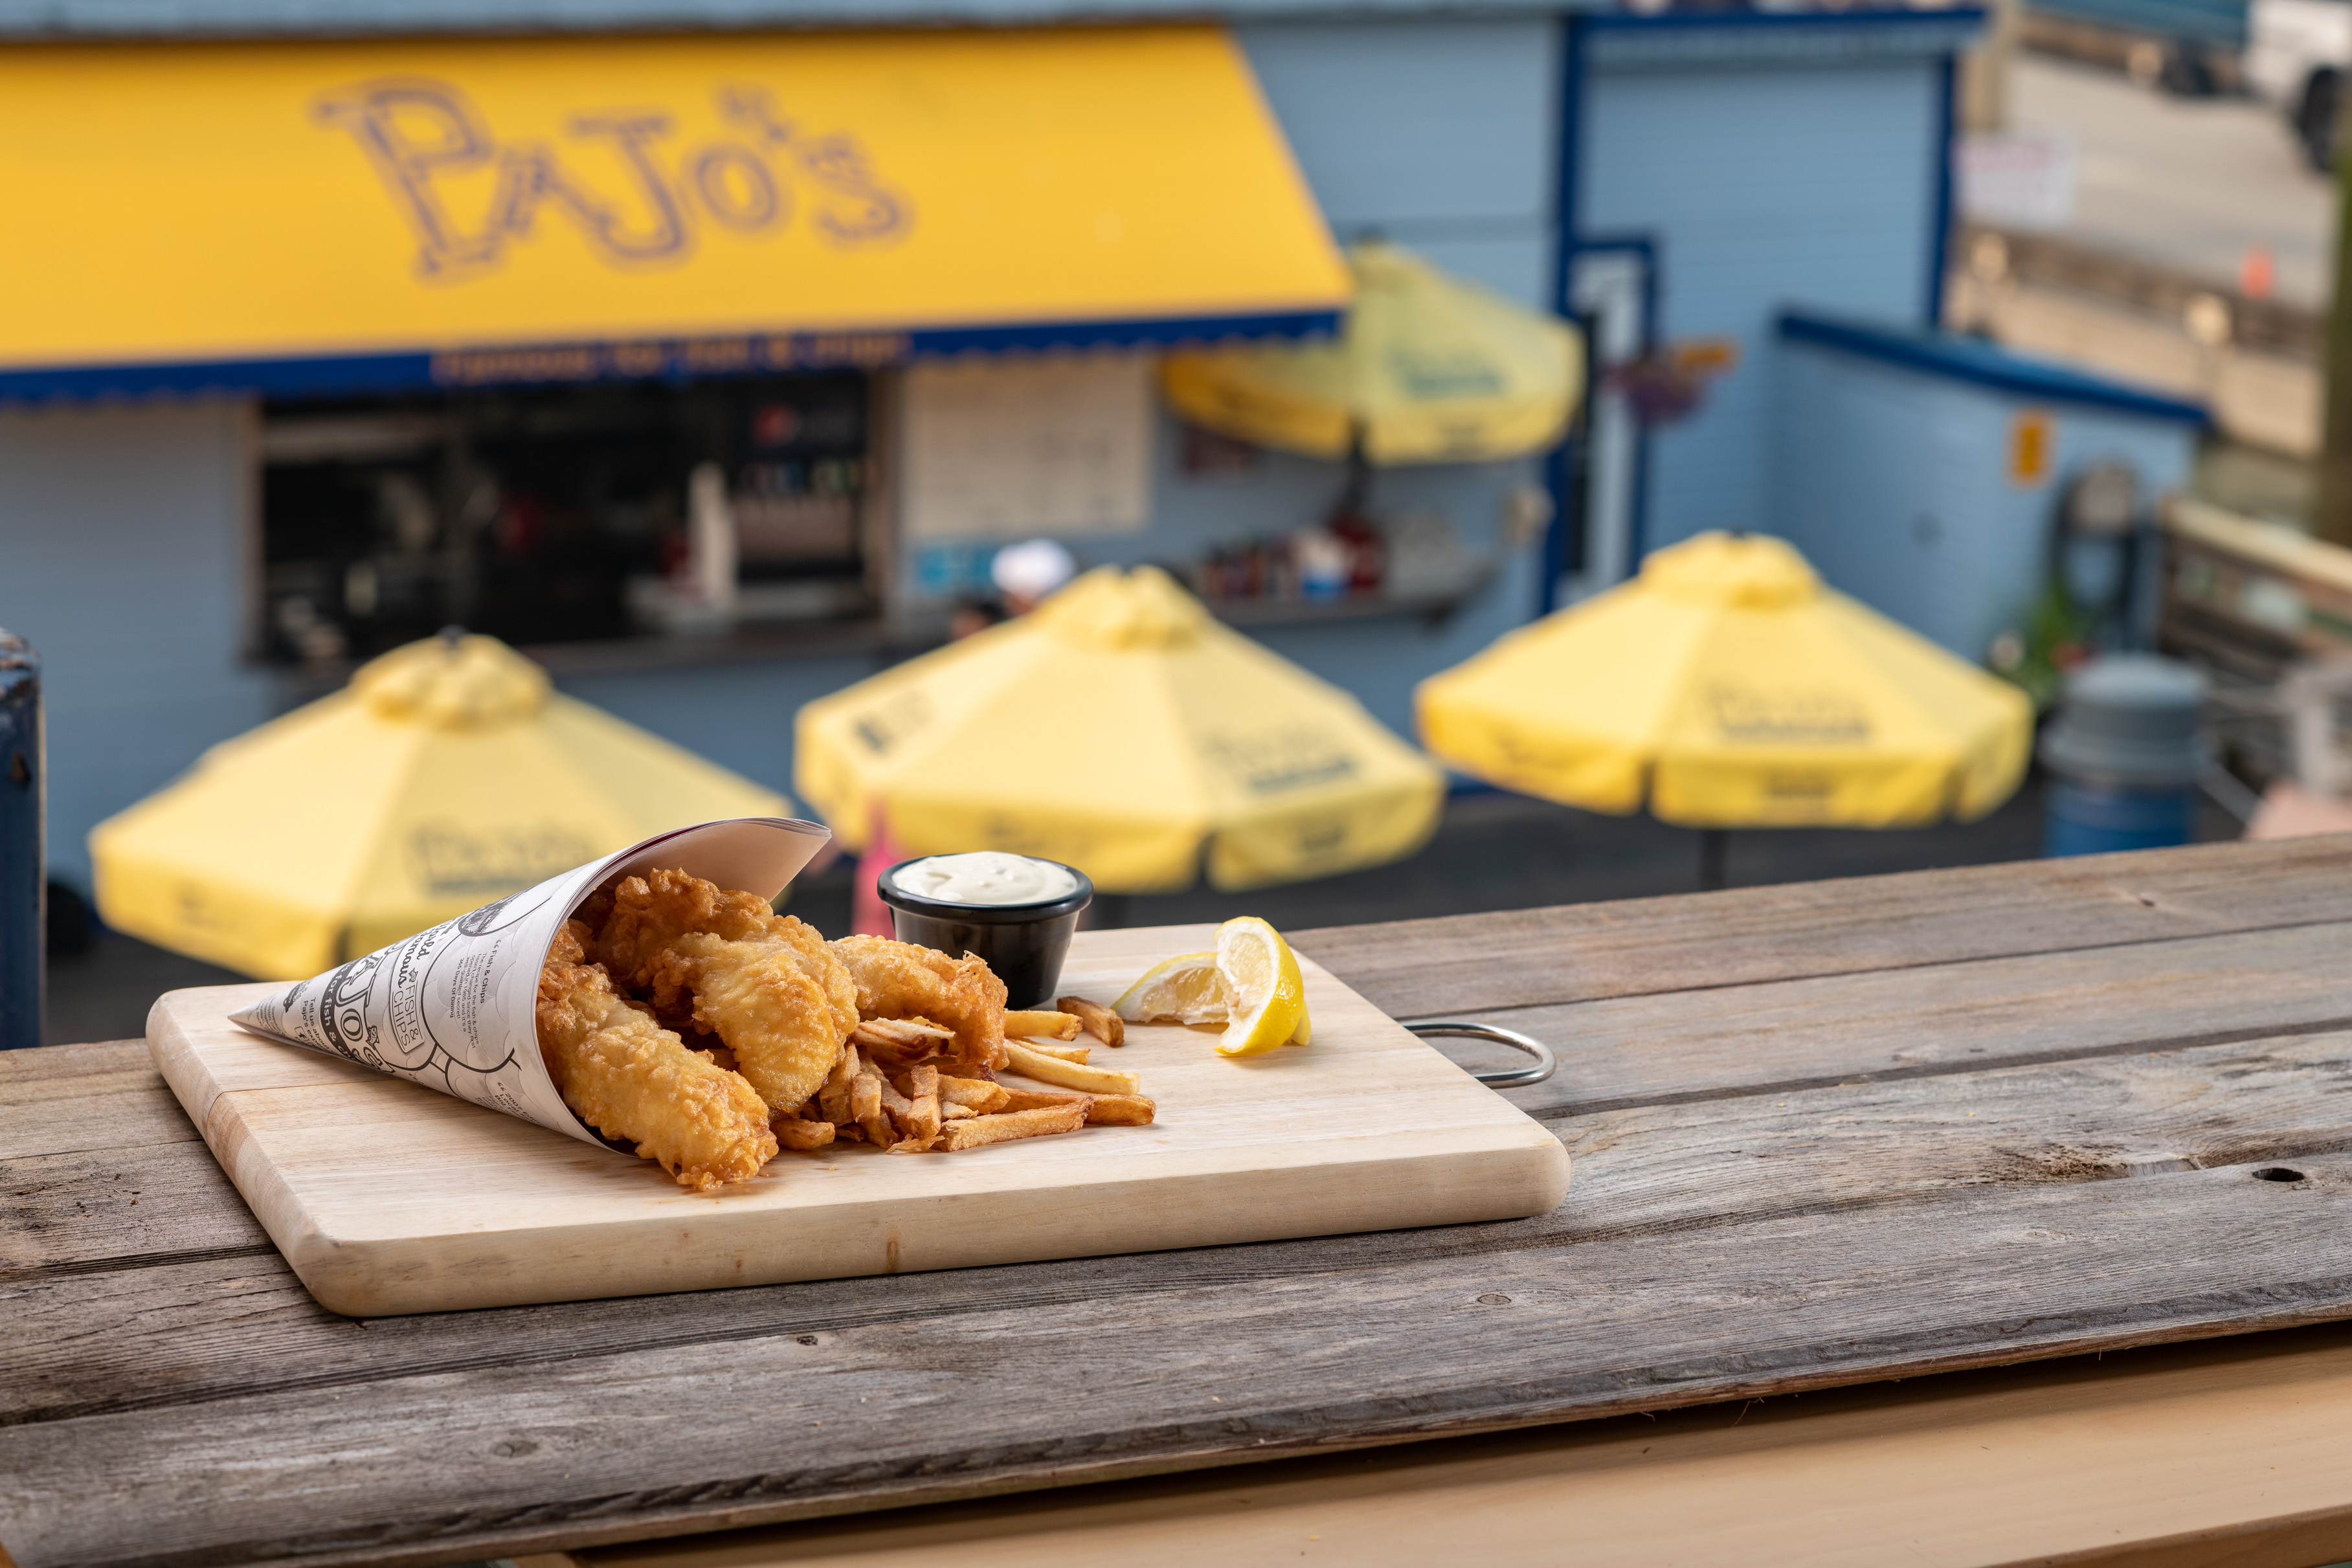 Pajo’s Fish & Chips